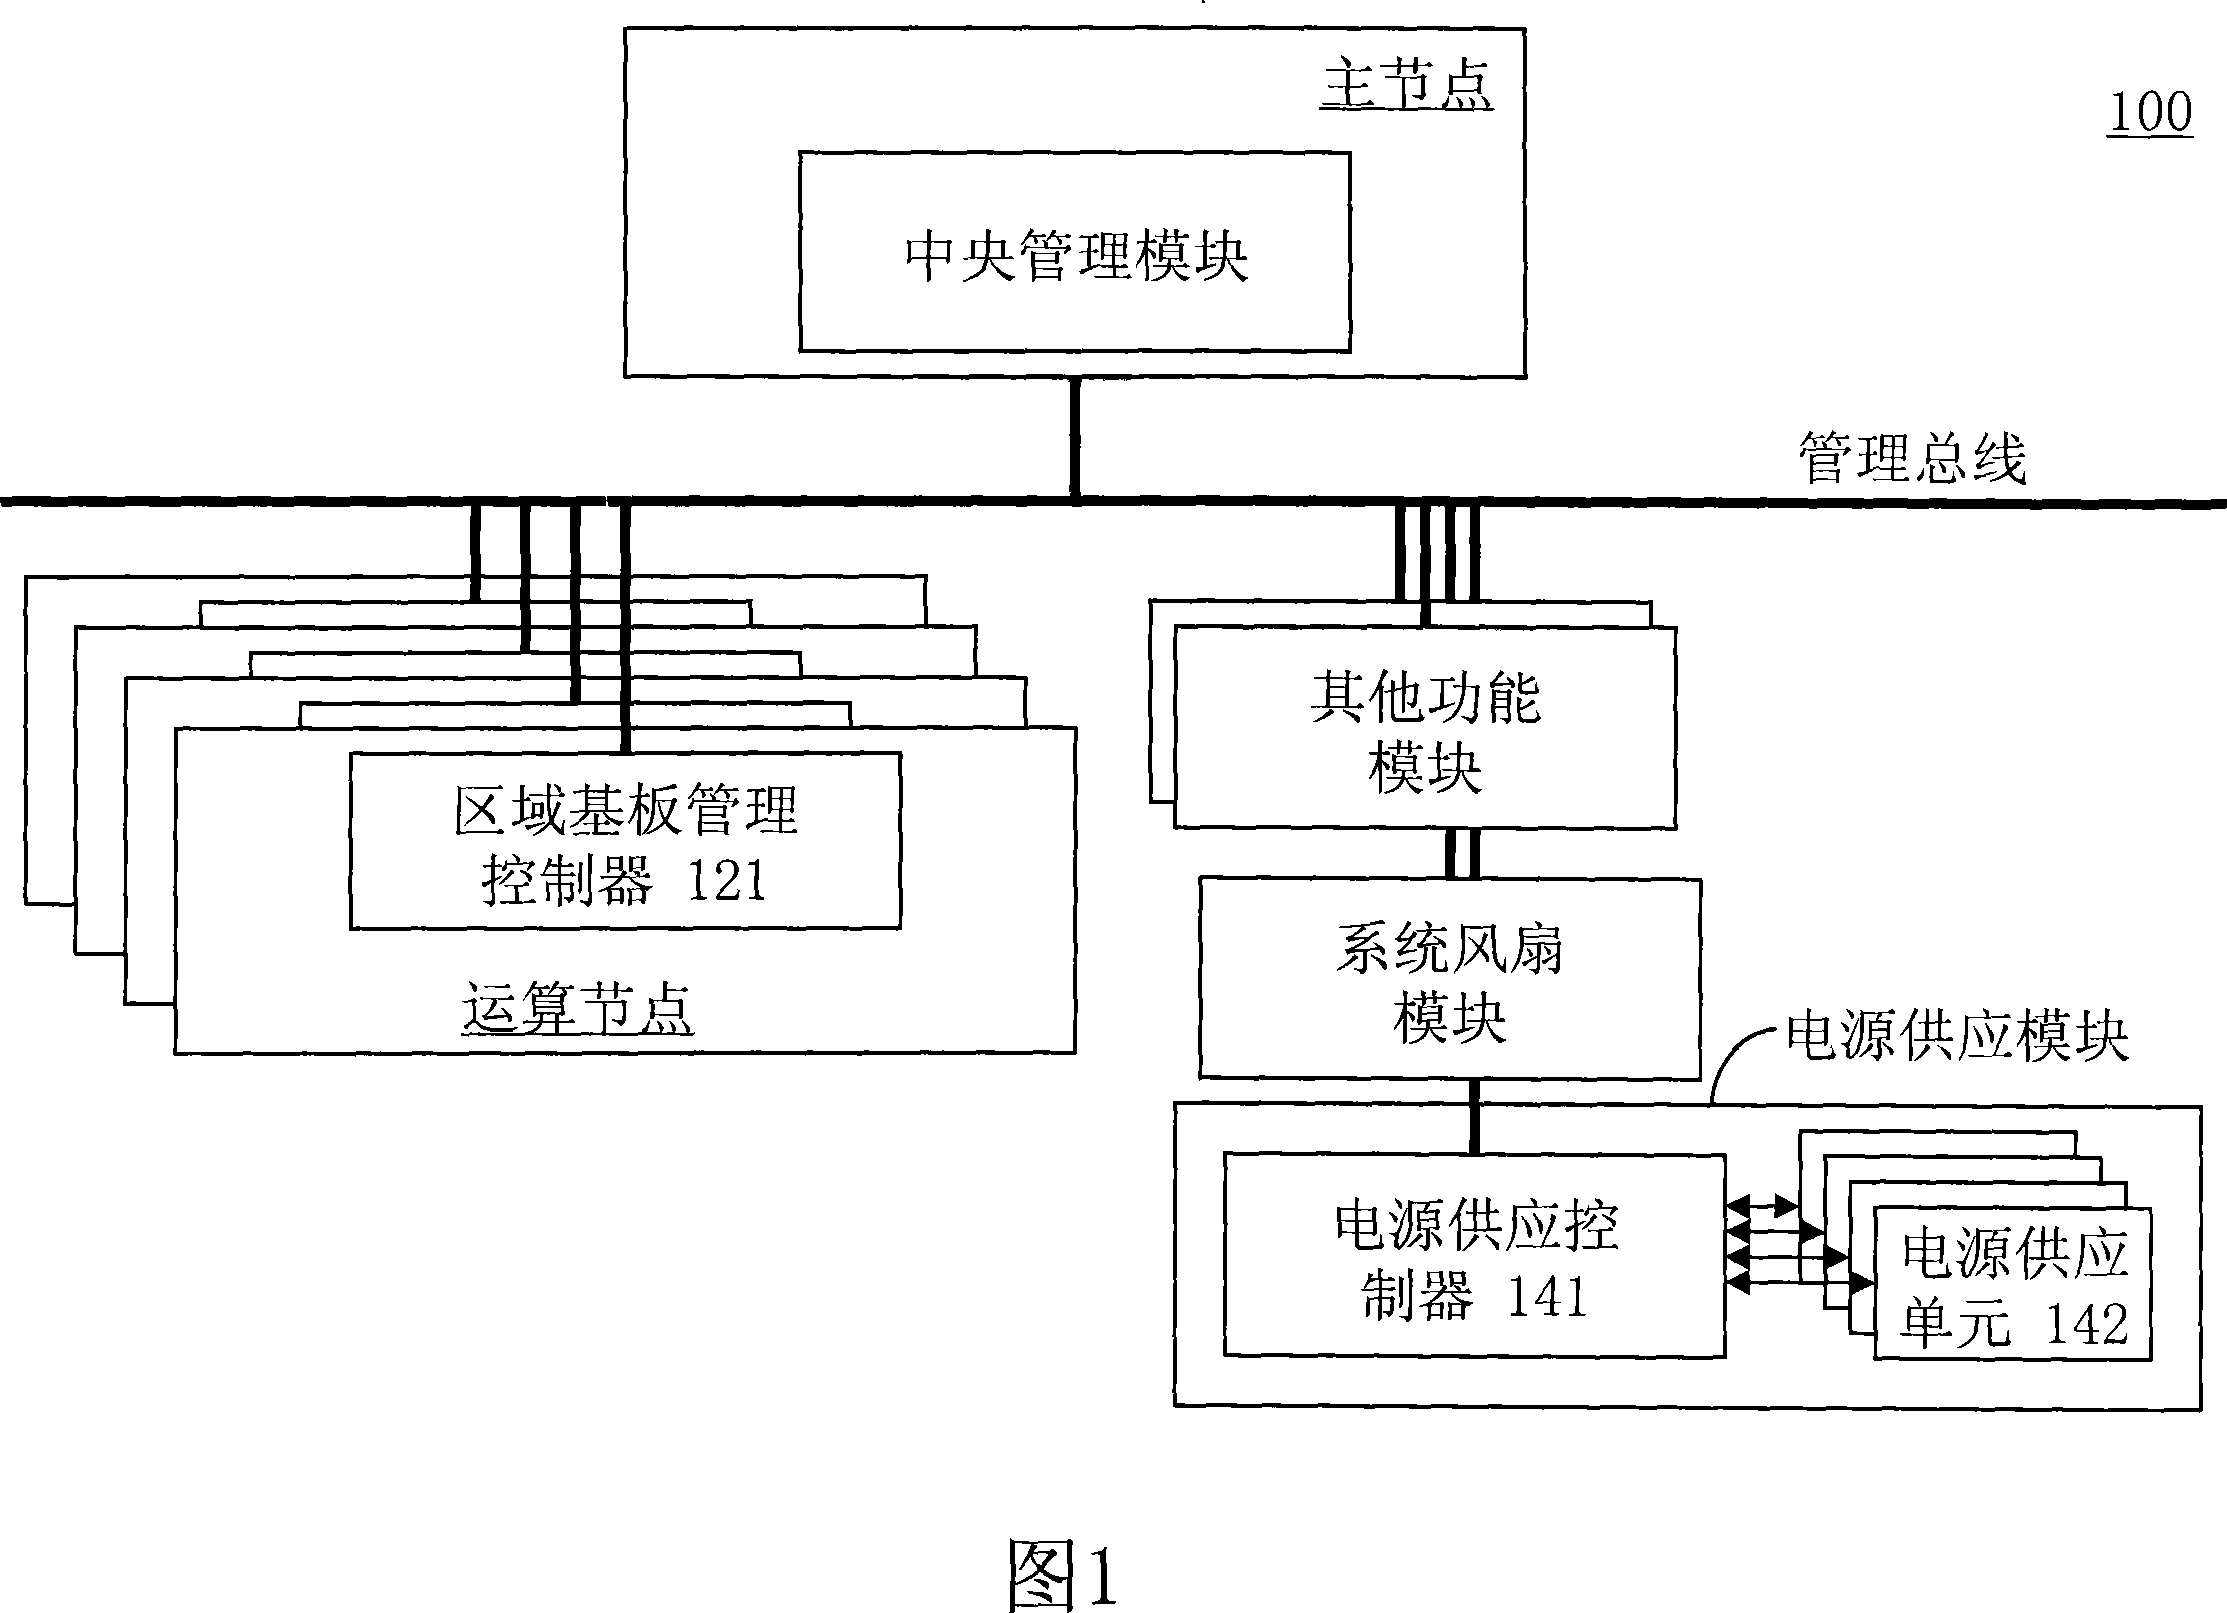 System management configuration of multiple main board system